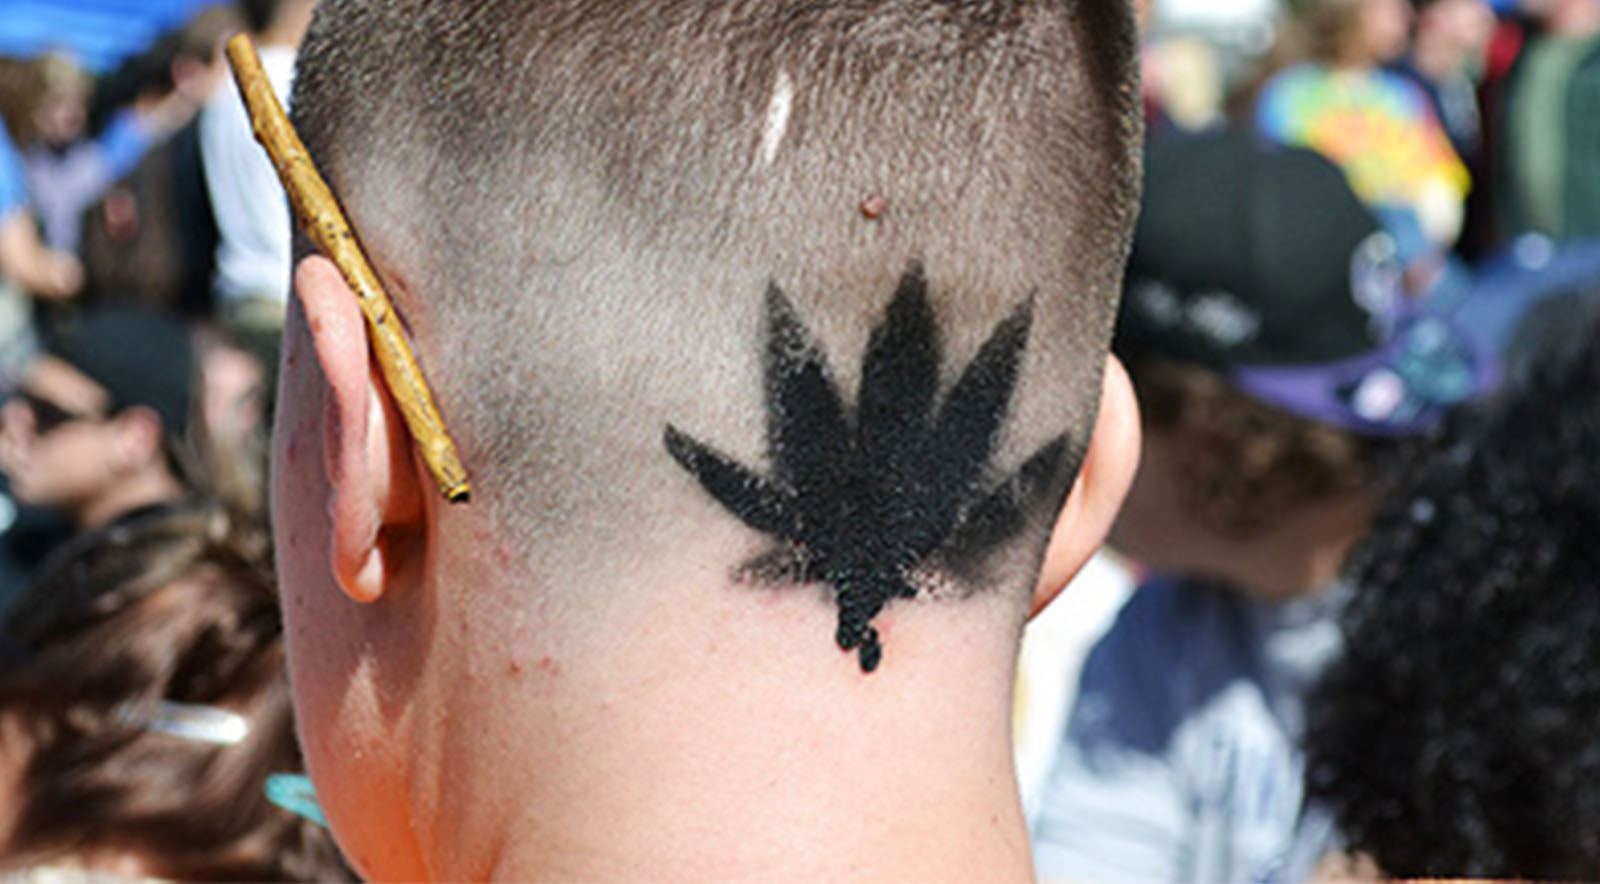 Should You Get High Before Getting a Tattoo?